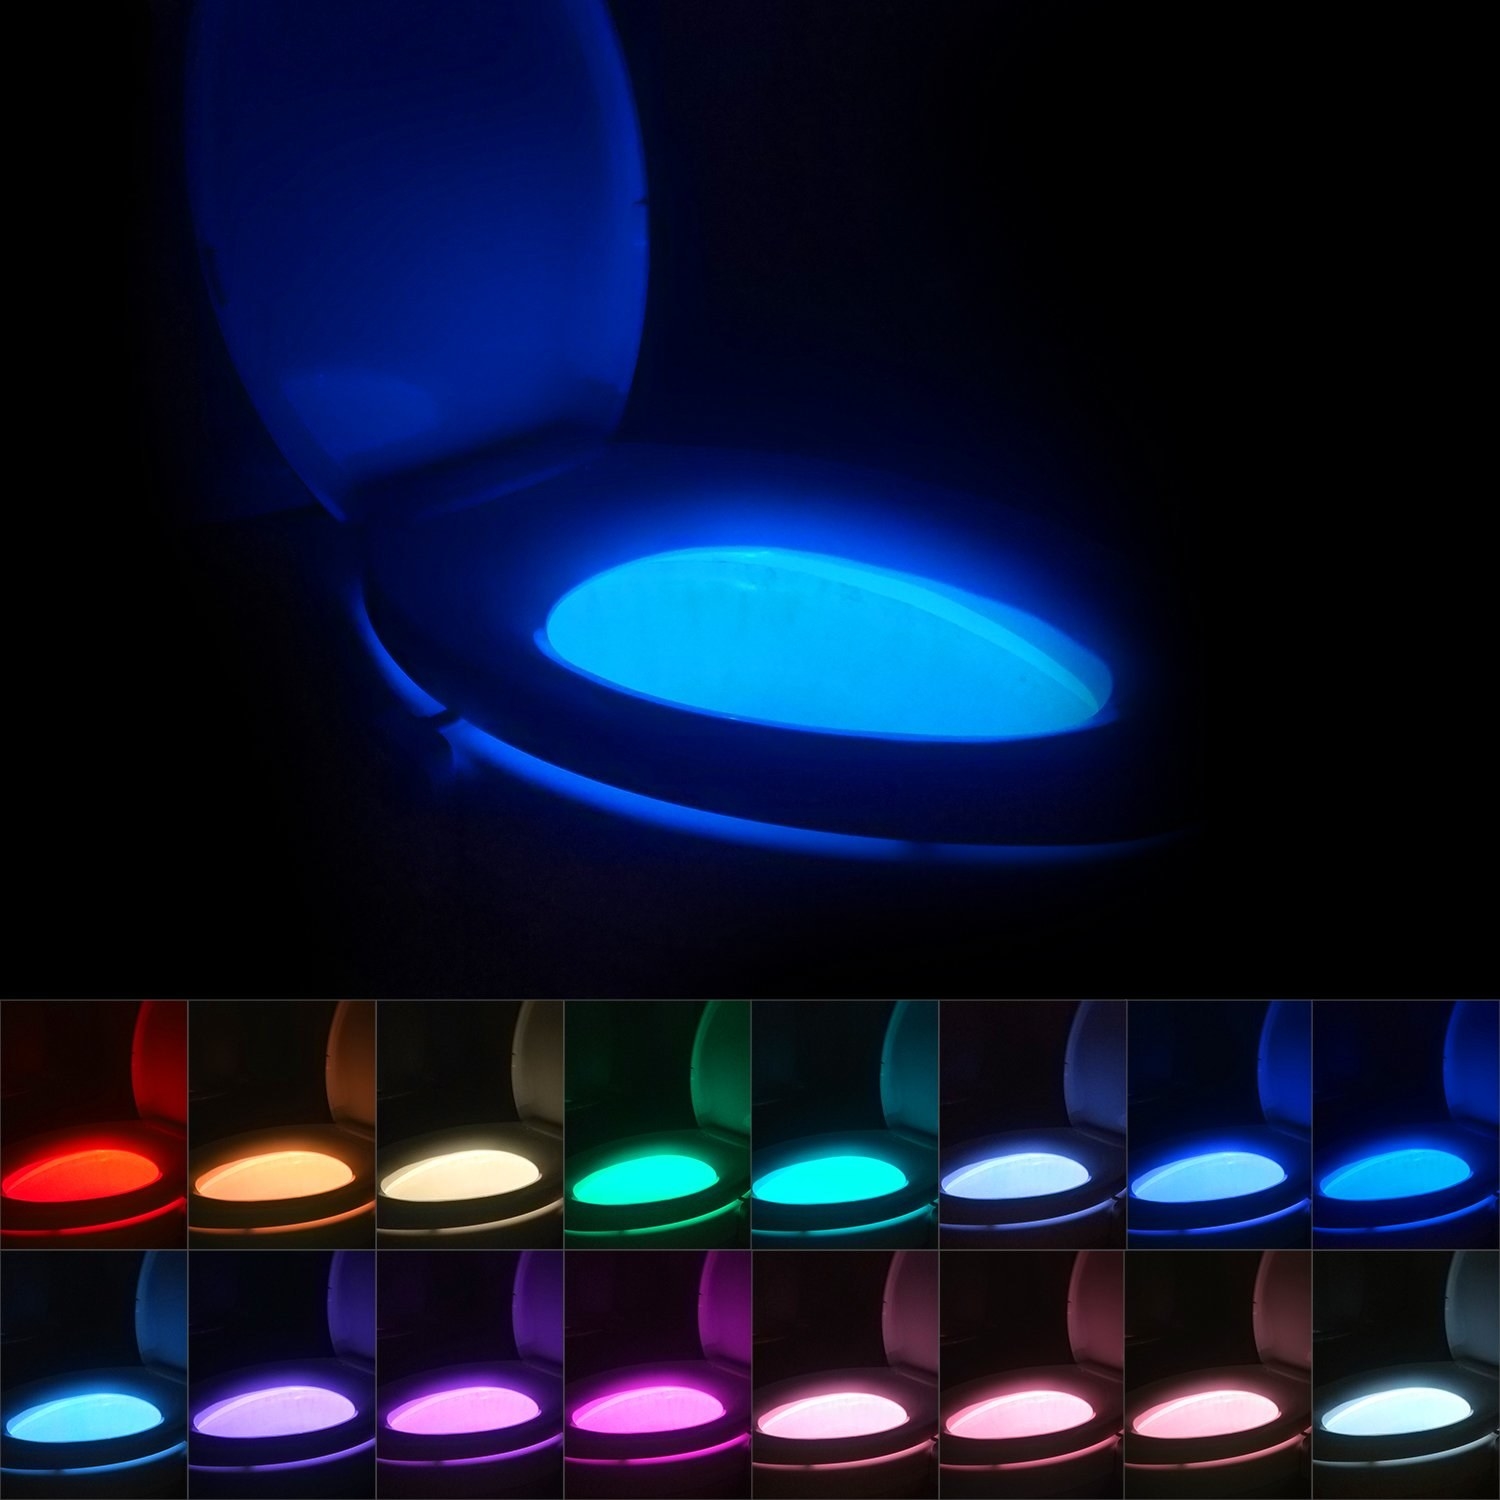 The toilet light glowing in 16 different colors